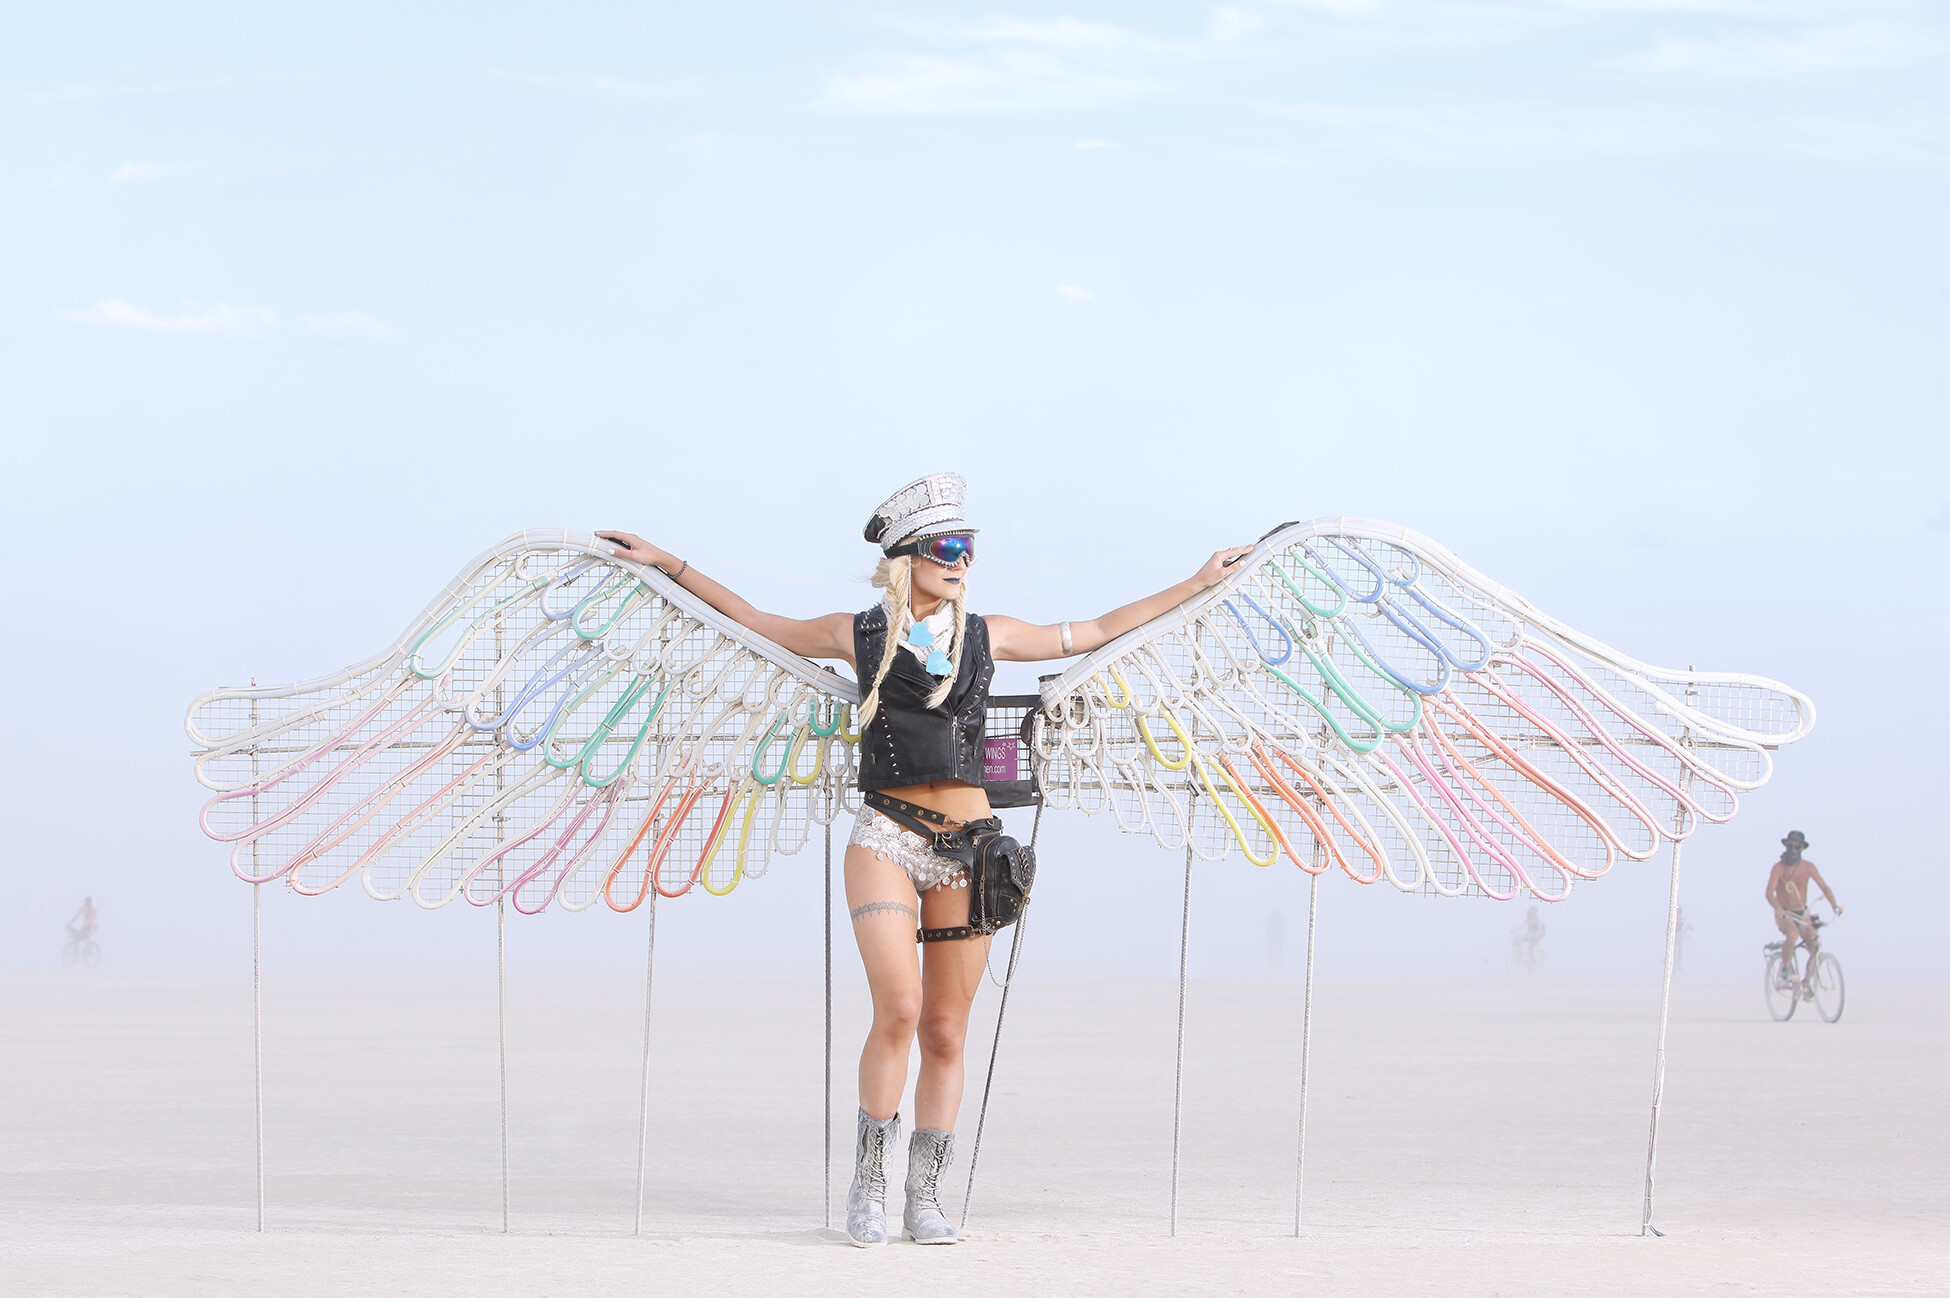 Burning Man is an annual, nine-day gathering in the Nevada desert. Seventy Thousand free spirits descending on the desert to create a temporary fanciful city made up of a mixture of art, community and the downright bazaar. Photographer Justin Hession from Justin Hession Photography spent a week at Burning Man in 2016 at Black Rock City in Nevada. He photographed mainly portrait photos of the wonderful people who visited the Burning Man Festival